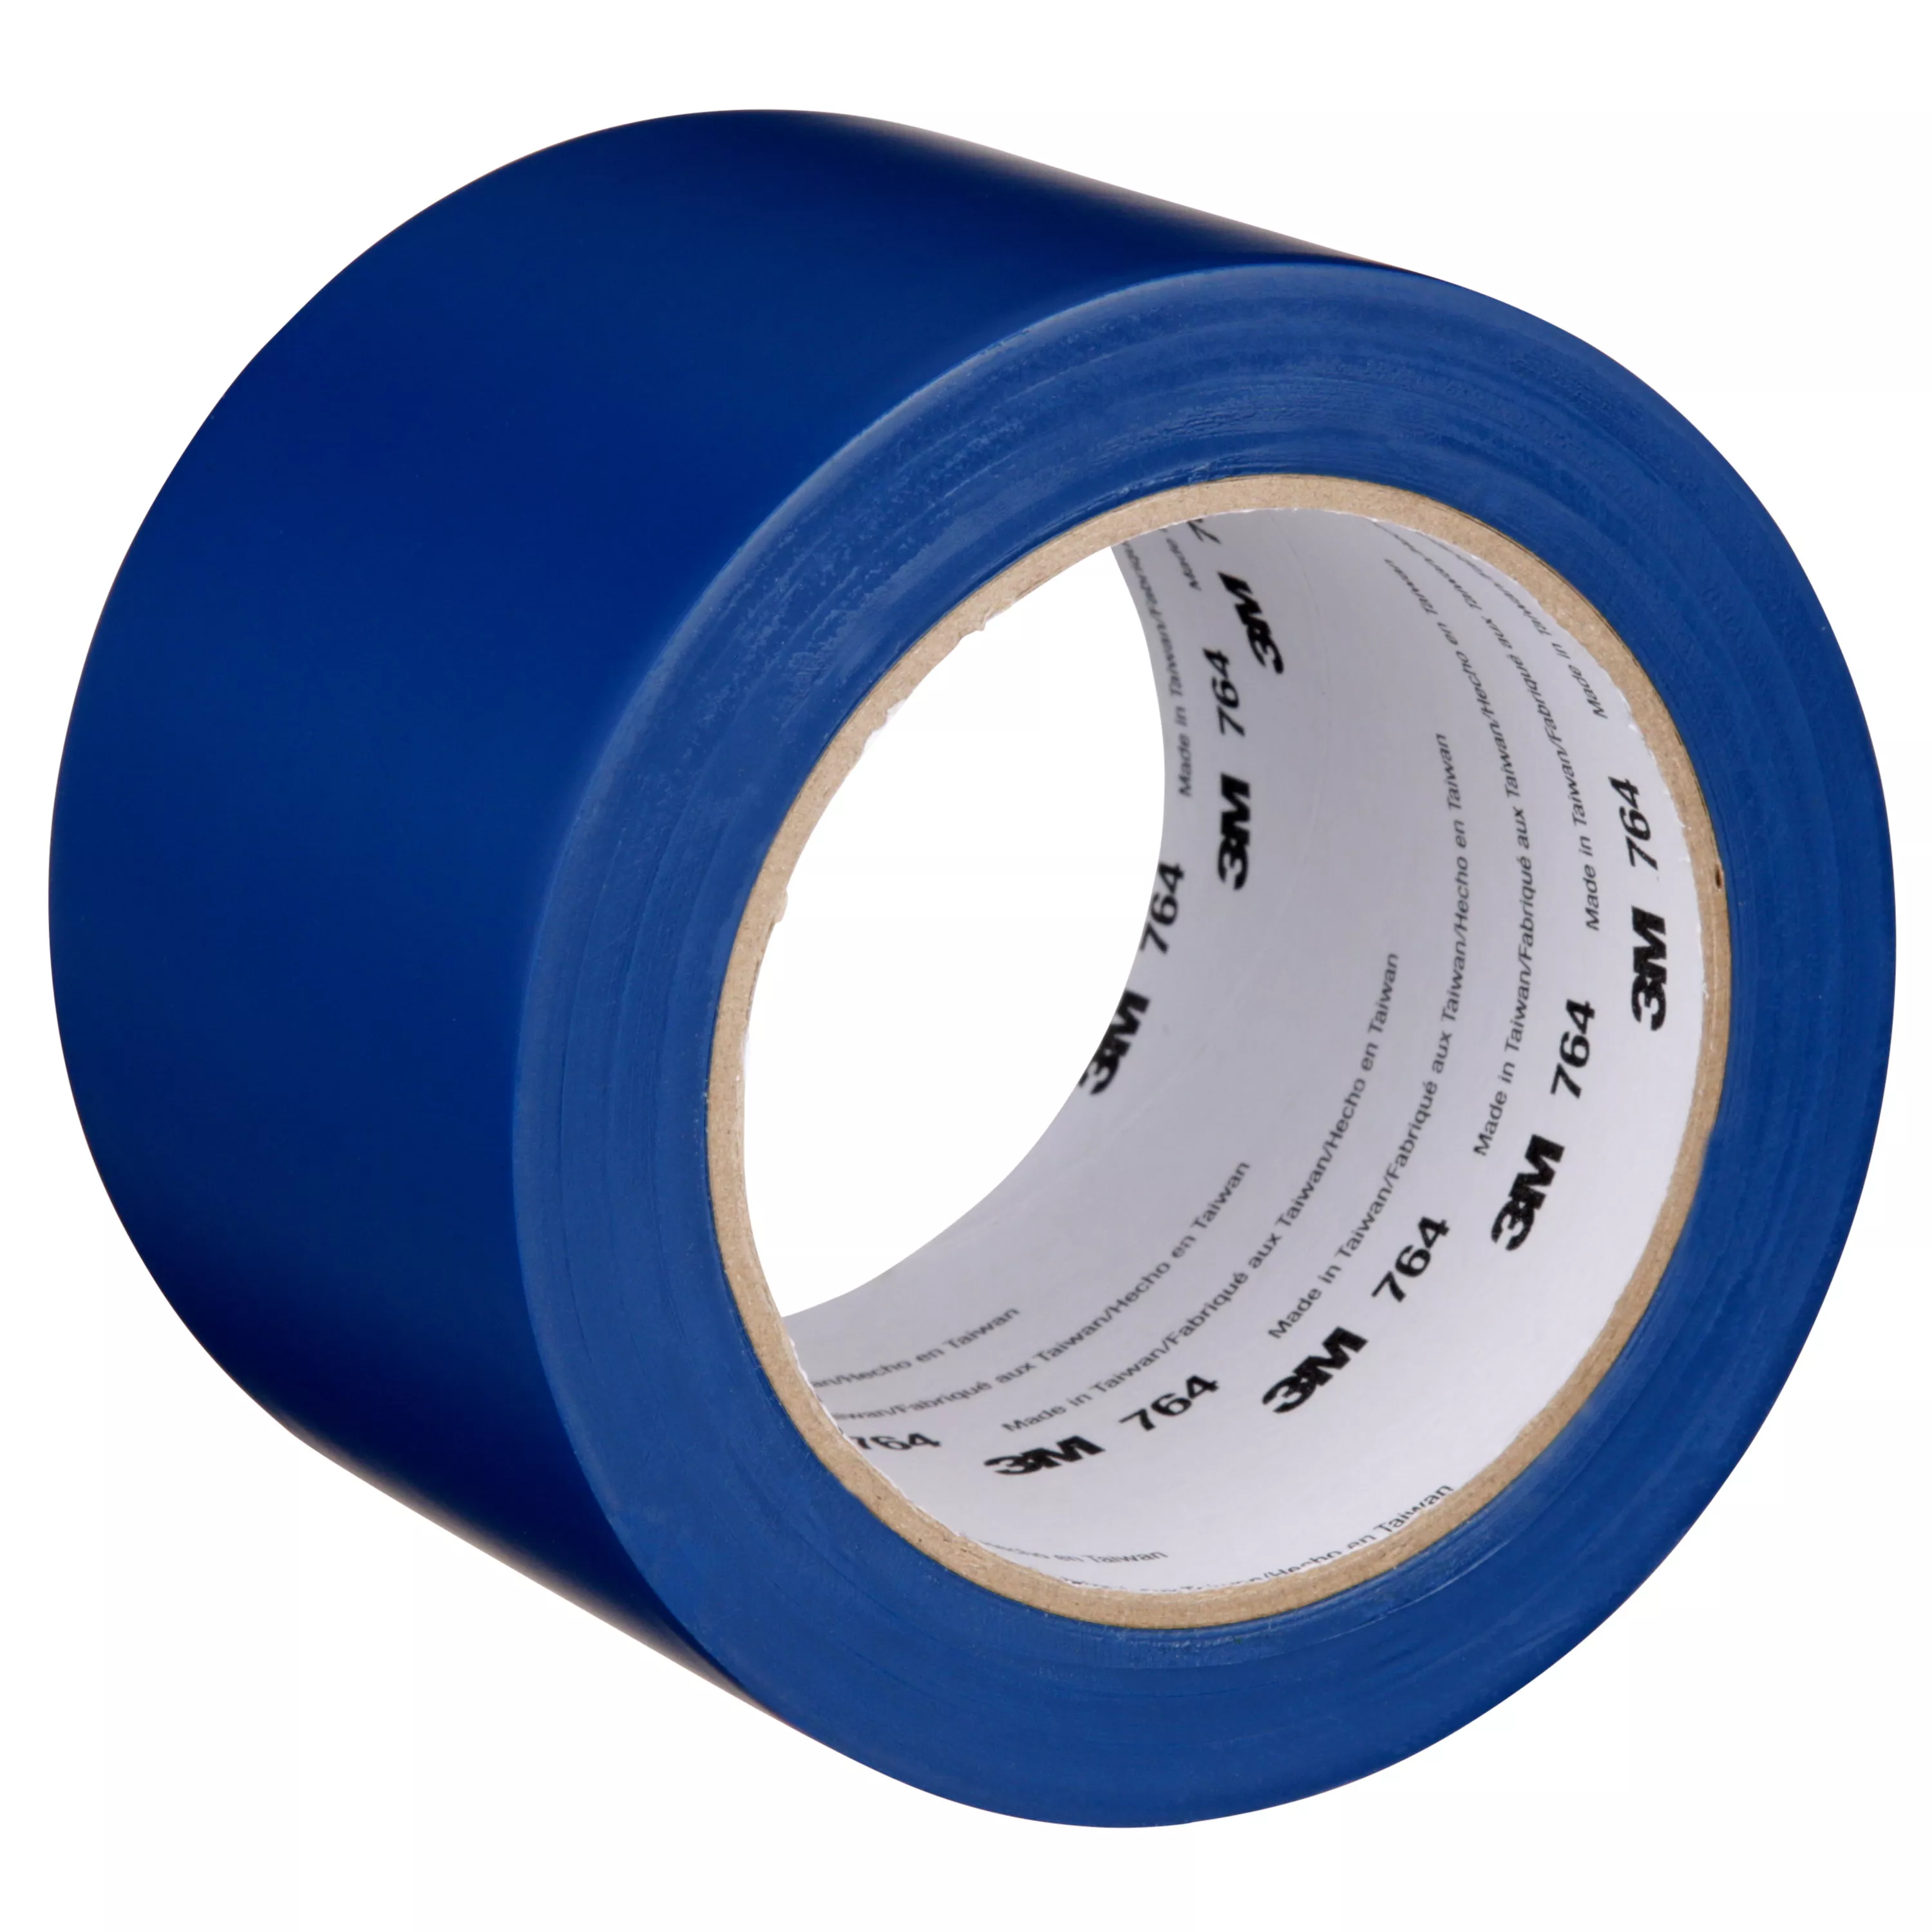 3M™ General Purpose Vinyl Tape 764, Blue, 3 in x 36 yd, 5 mil, 12 Roll/Case, Individually Wrapped Conveniently Packaged